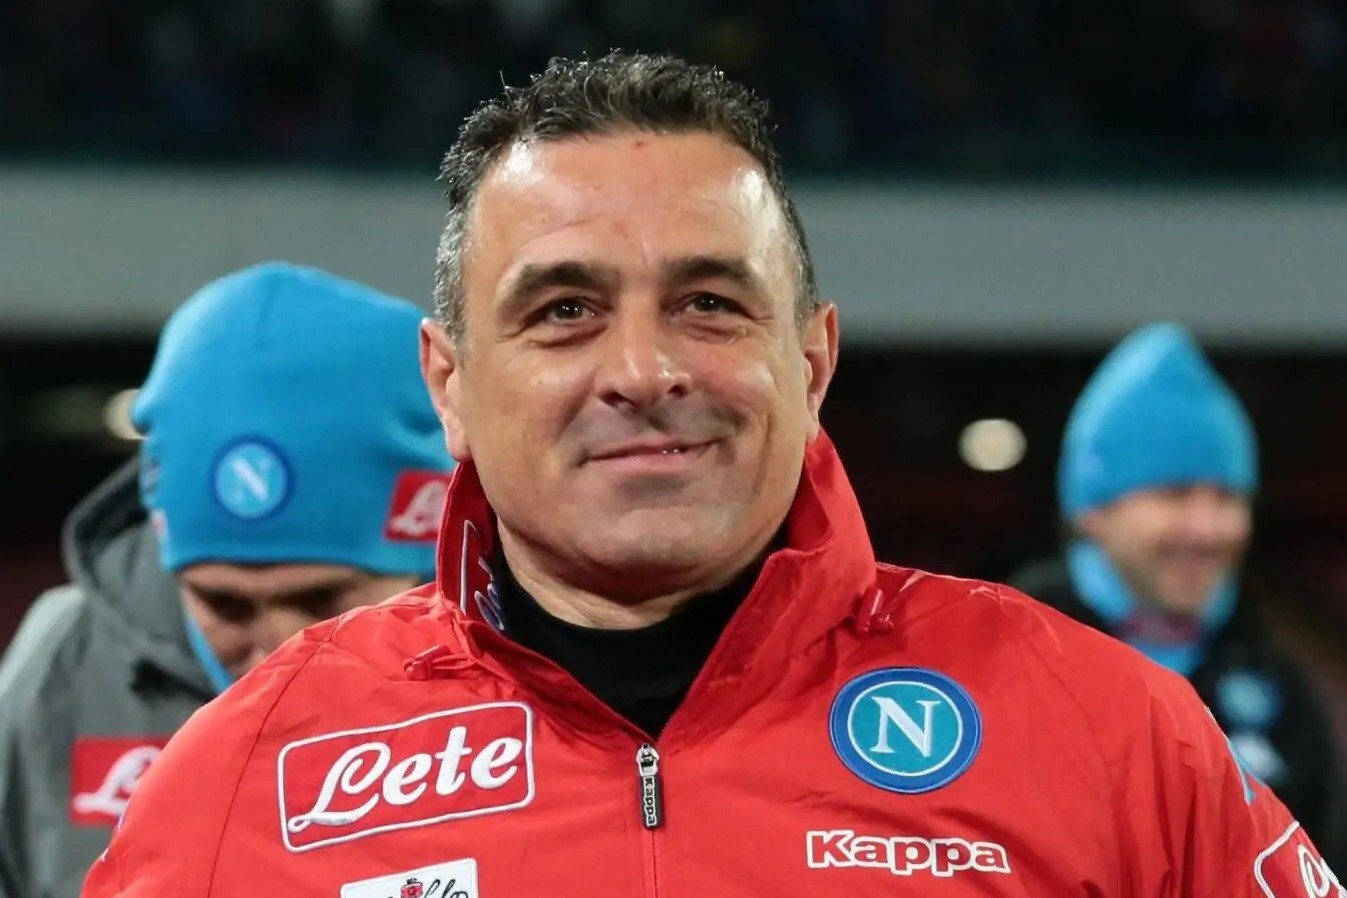 Napoli entrusted him for the 3rd time